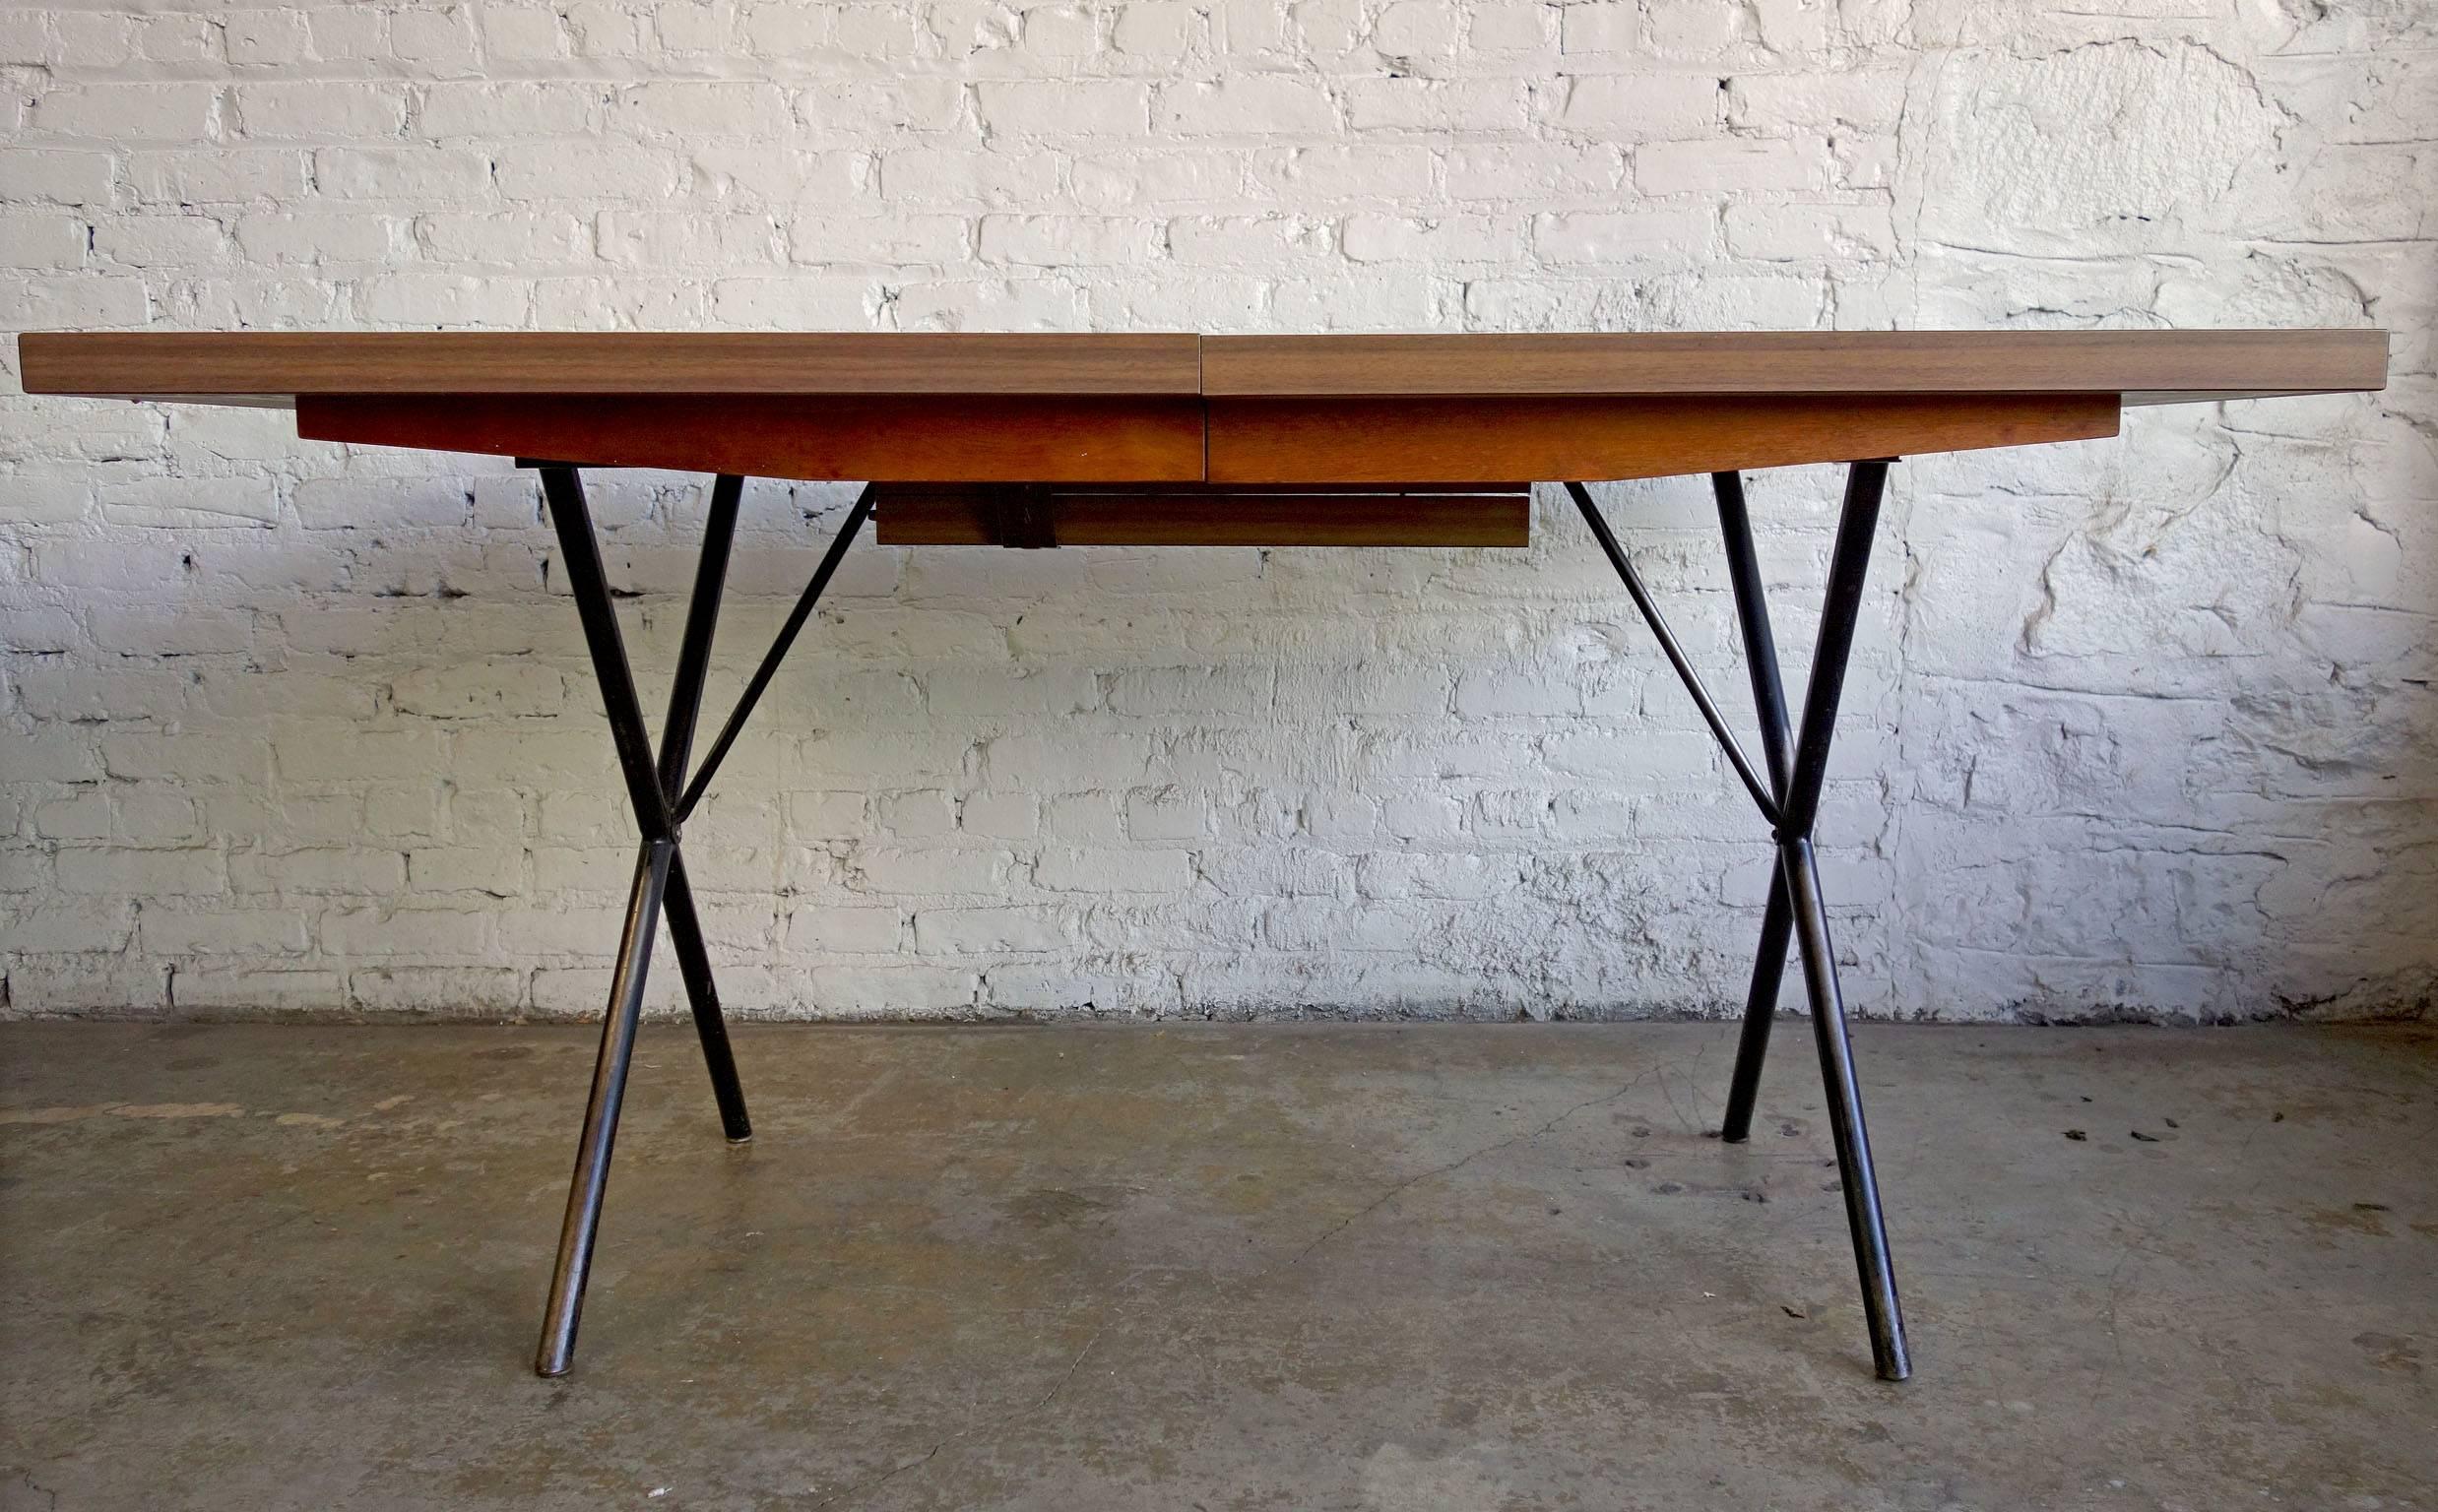 Early Mid-Century George Nelson for Herman Miller X-leg dining table.
Perfect patina on this dining or kitchen table that can be extended from 54